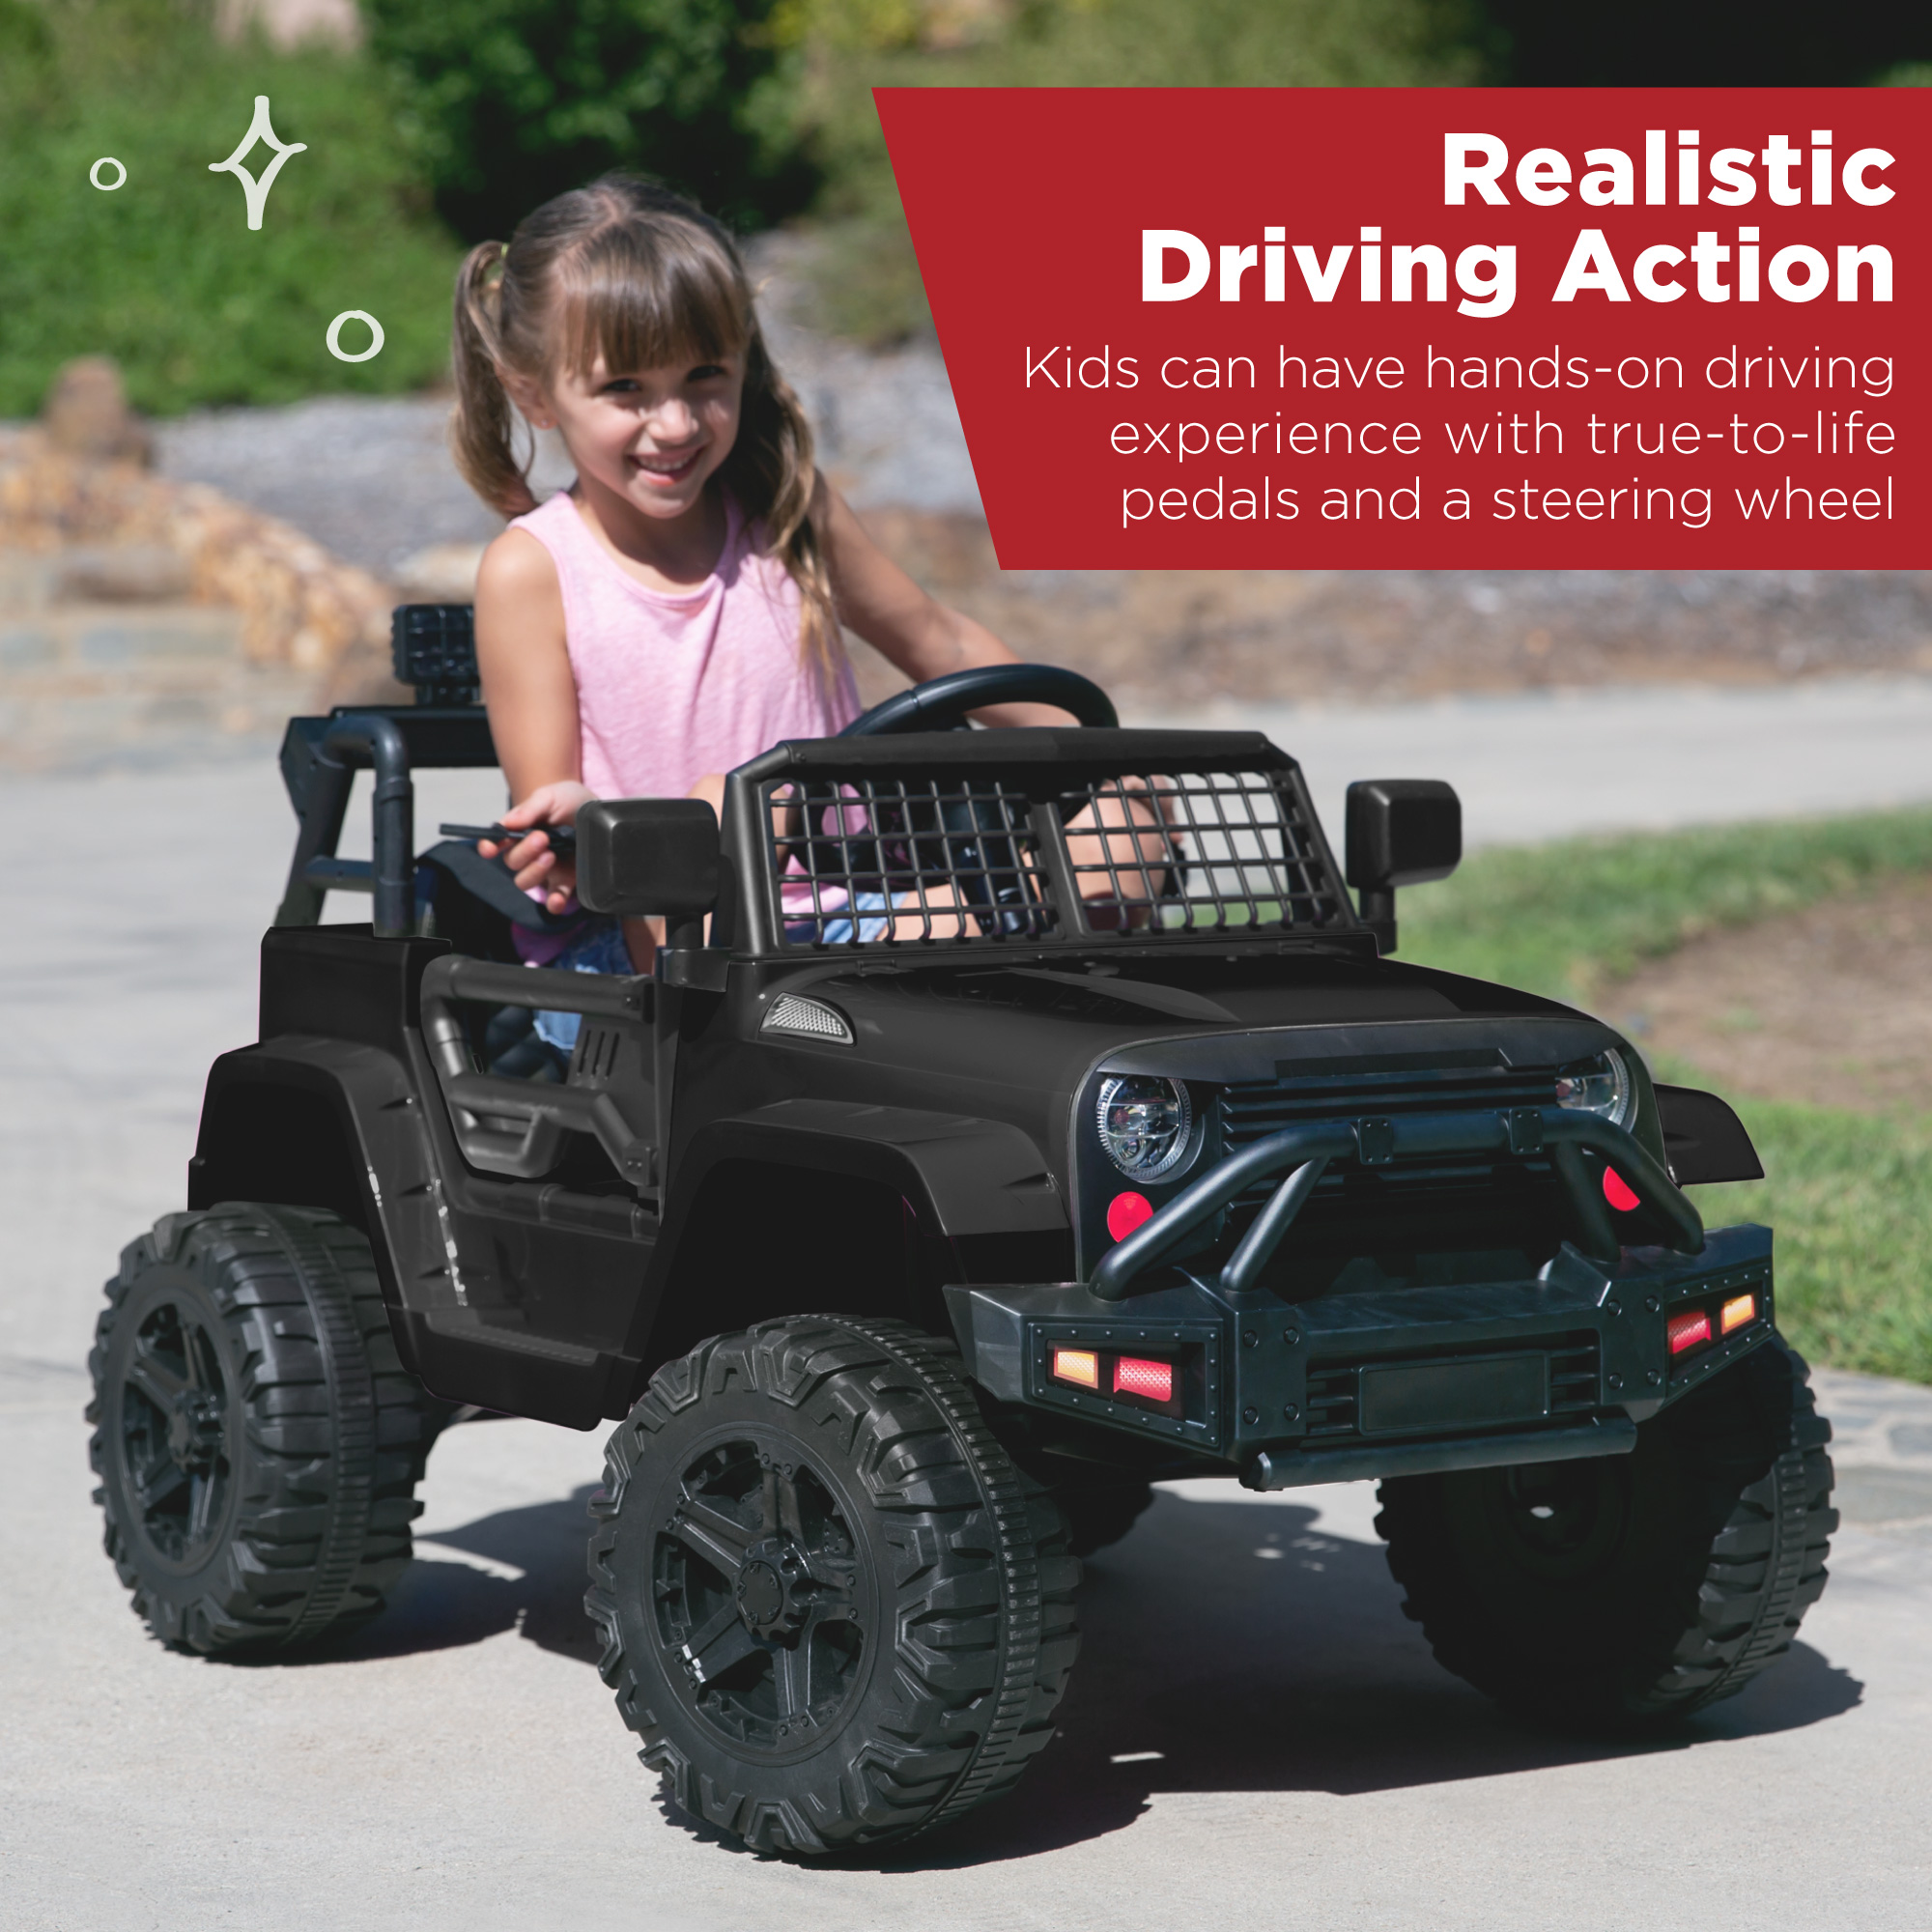 Best Choice Products 12V Kids Ride On Truck Car w/ Parent Remote Control, Spring Suspension, LED Lights - Black - image 3 of 8